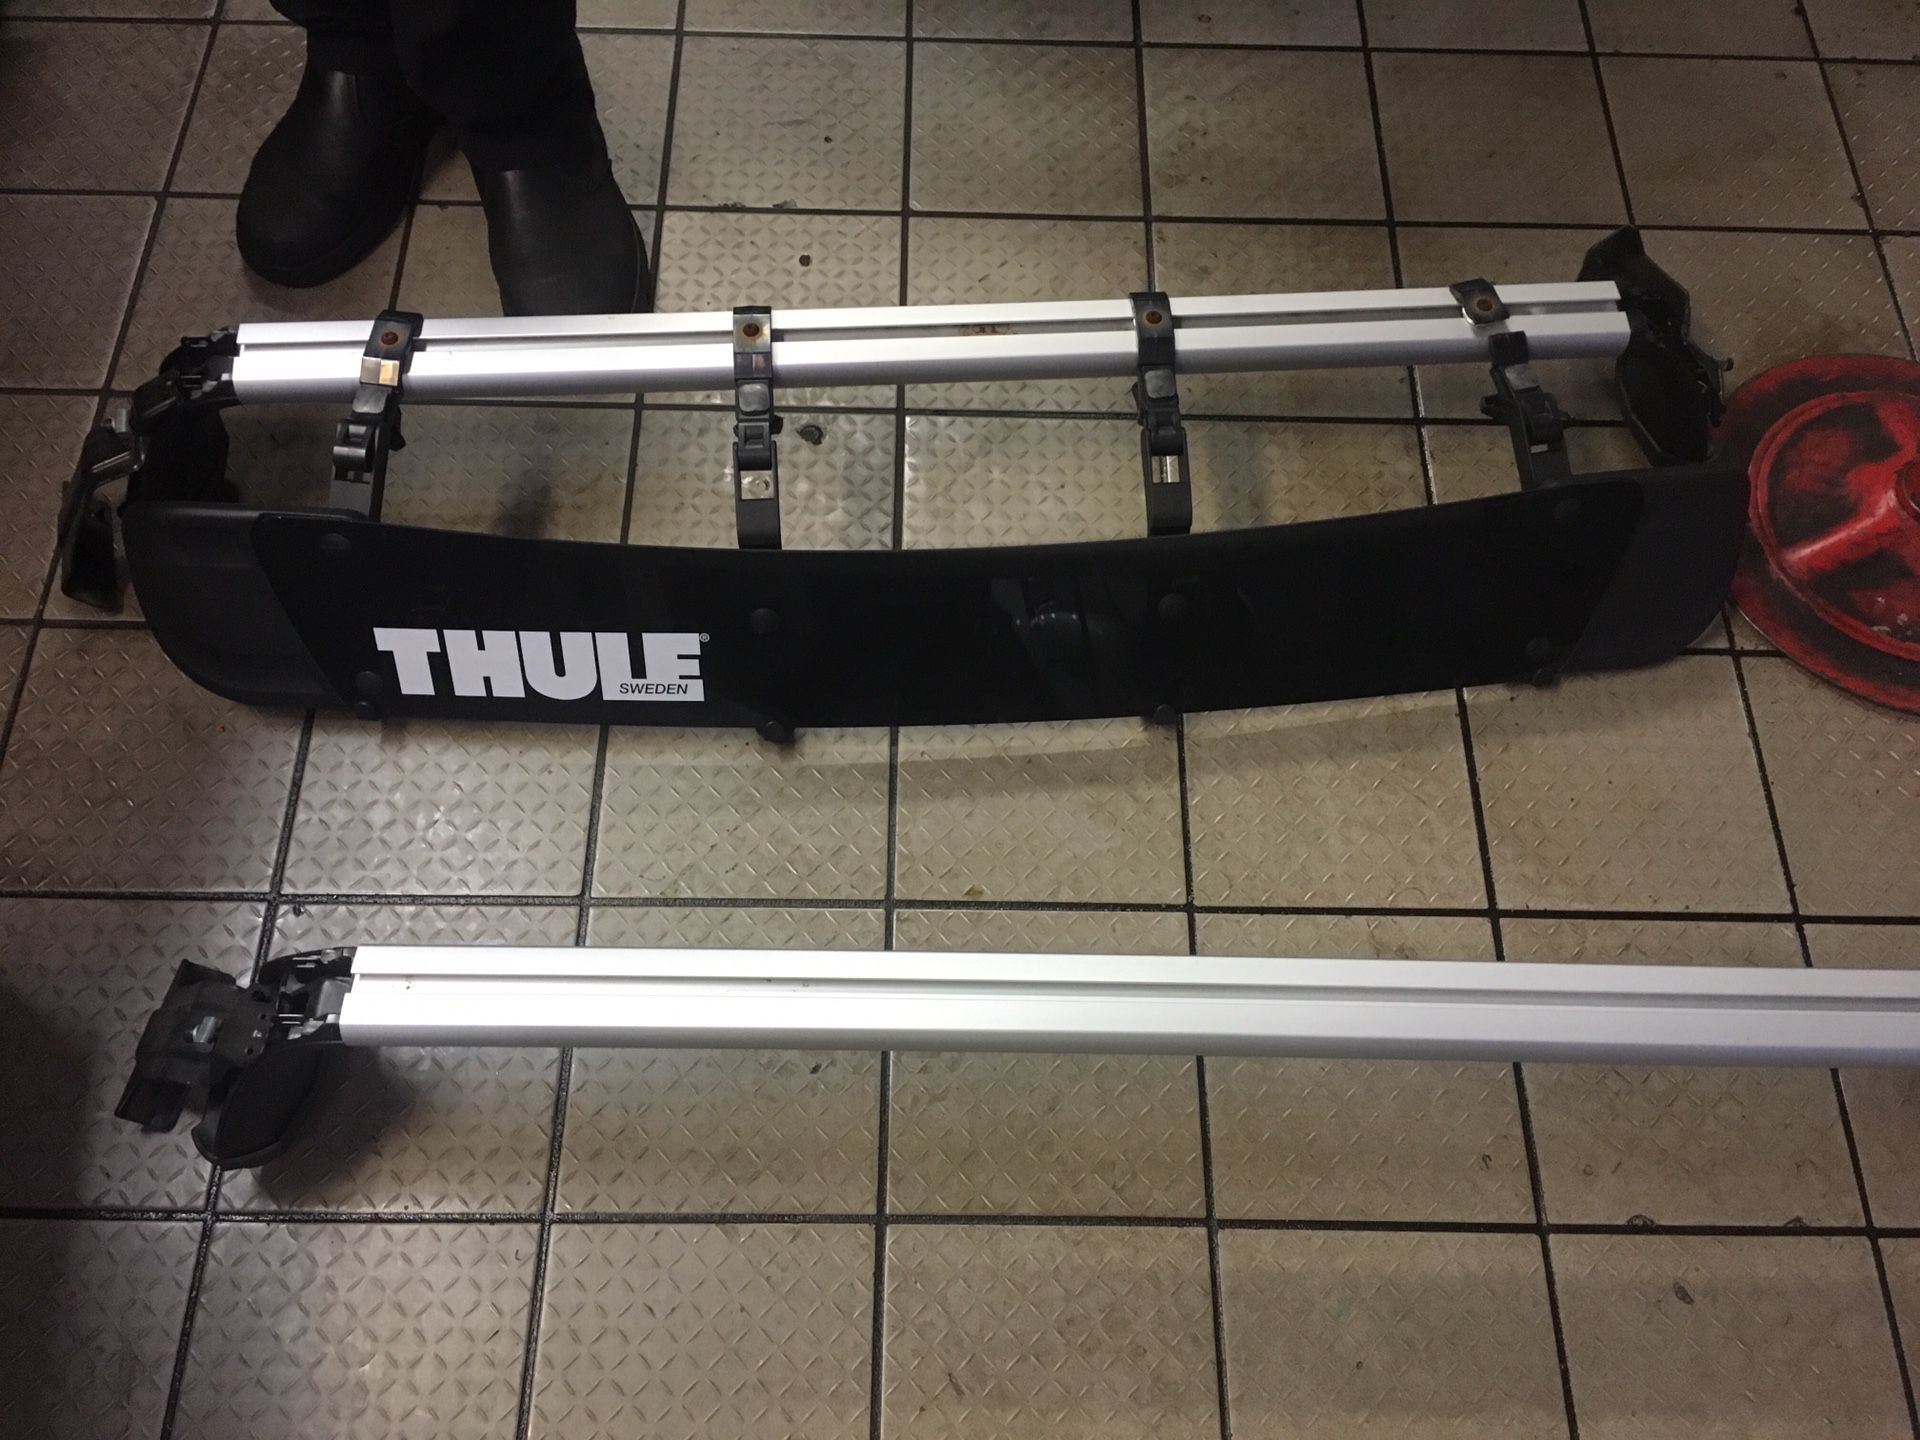 2015 gti roof rack with Thule Sweden deflector